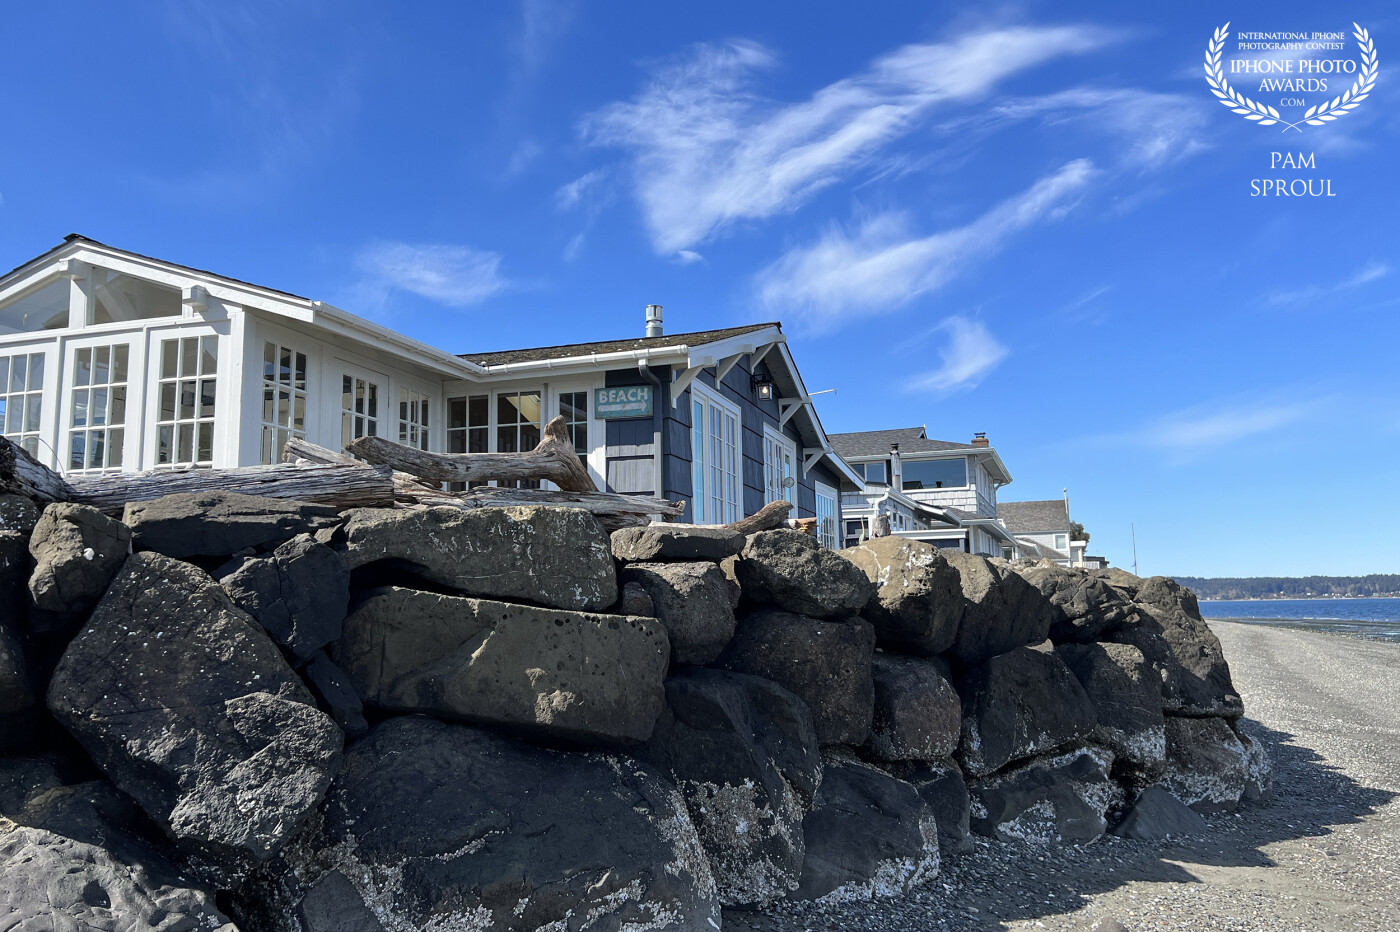 On a beachwalk on a sunny day in the Pacific NW and I glance up and see the Beachhouse set against a crystal blue sky, loved the contrast <br />
<br />
“Beachhouse Fay Bainbridge”-23